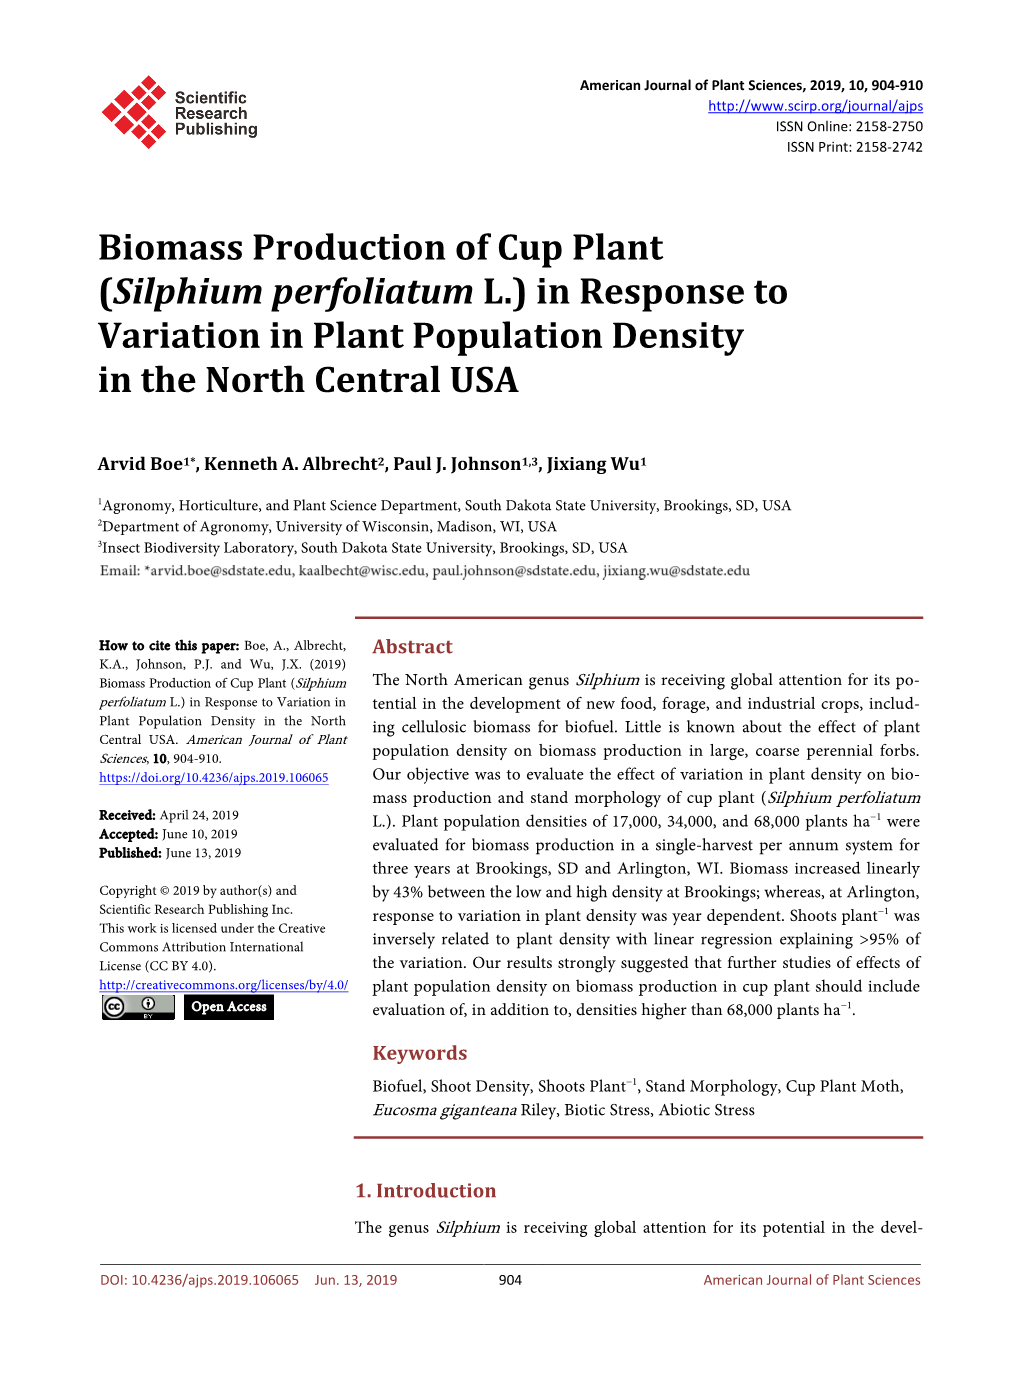 Biomass Production of Cup Plant (Silphium Perfoliatum L.) in Response to Variation in Plant Population Density in the North Central USA